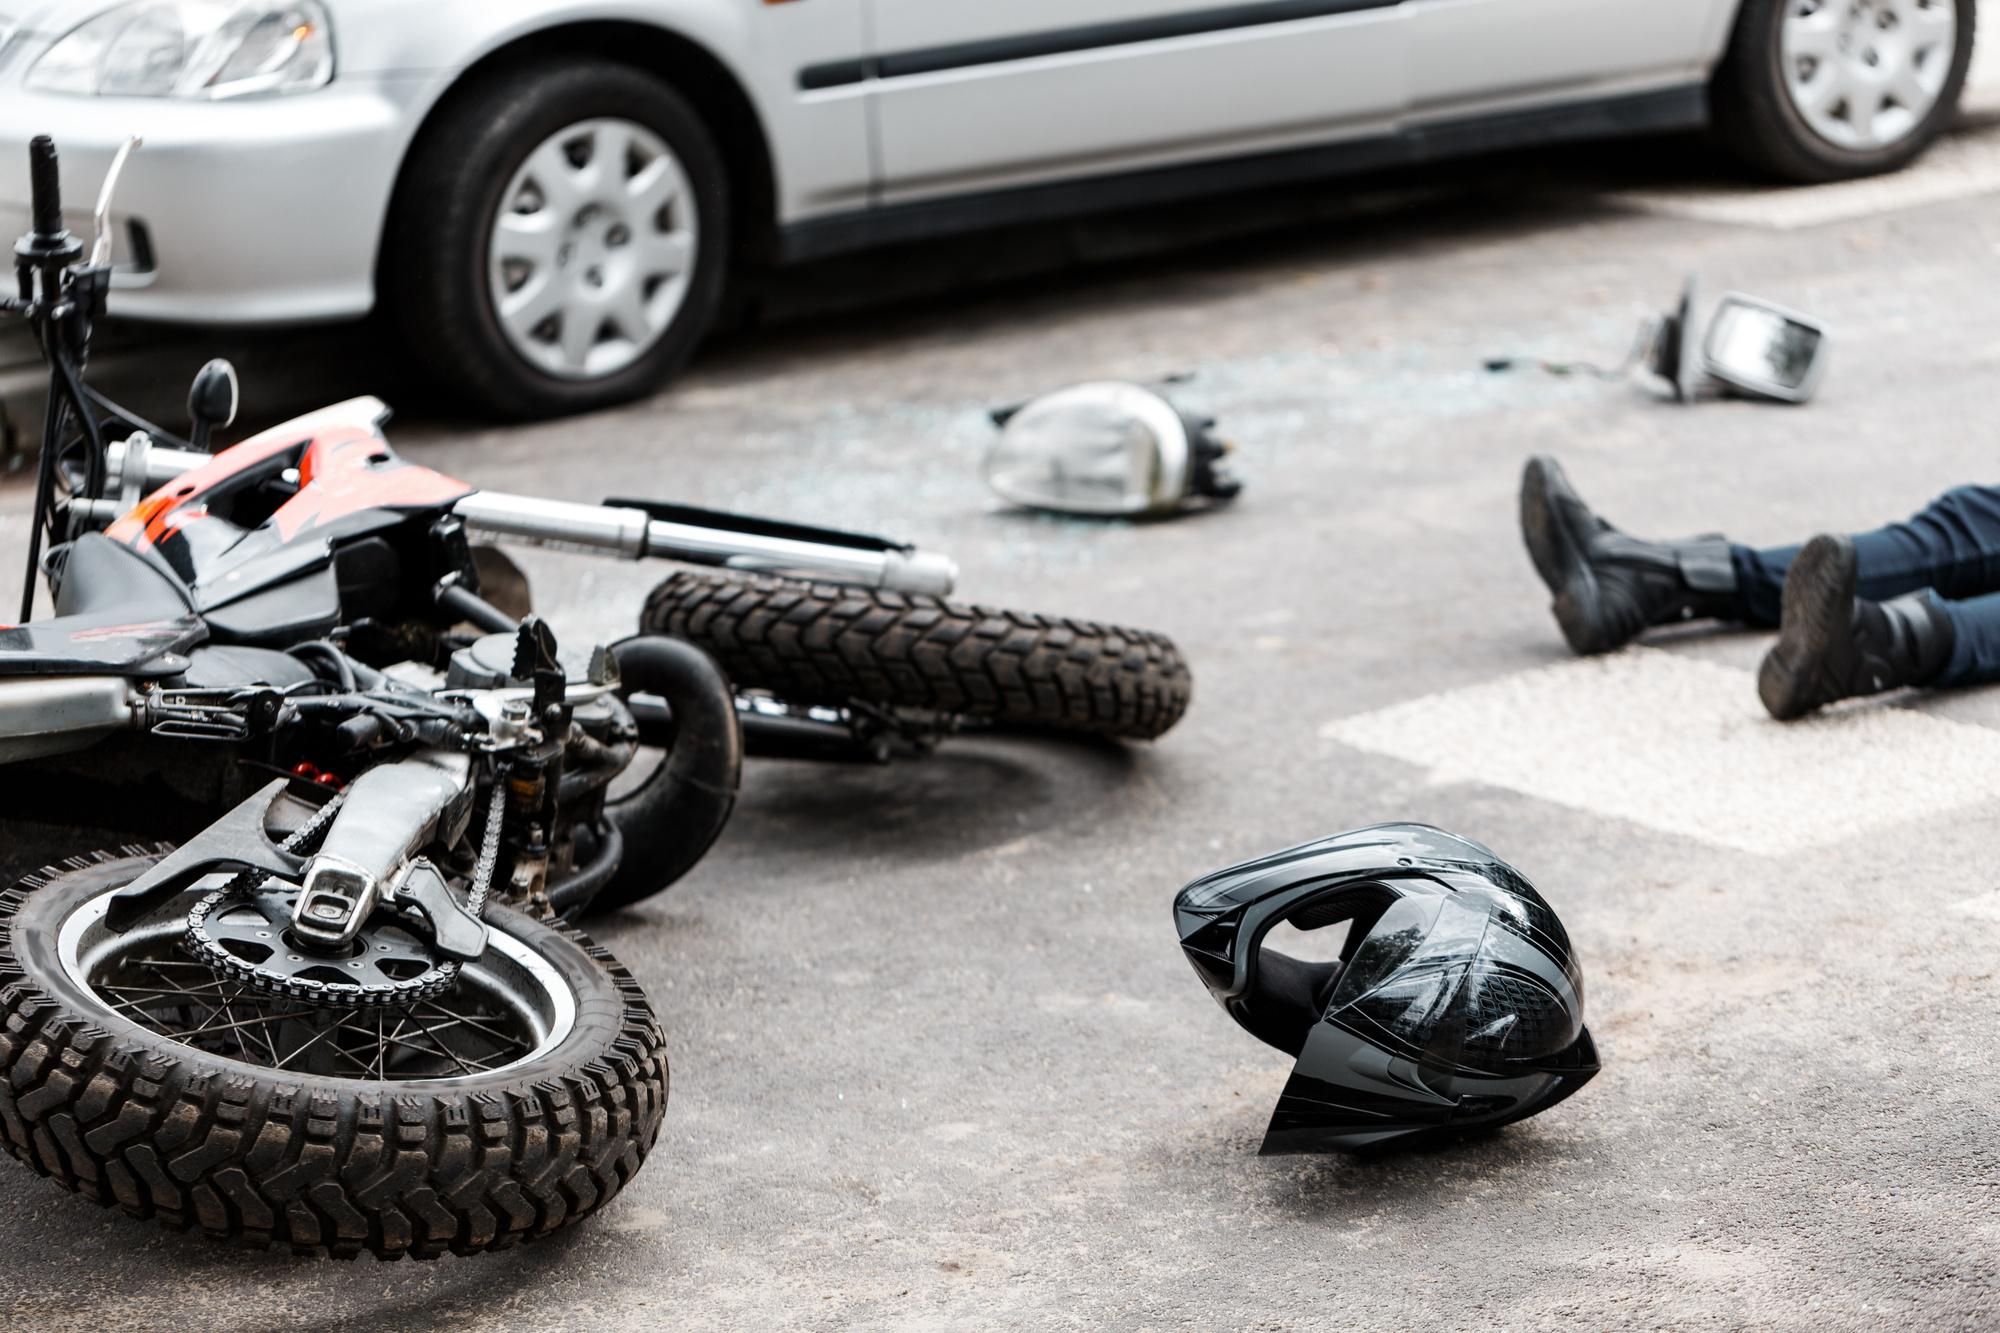 involved in a motorcycle accident